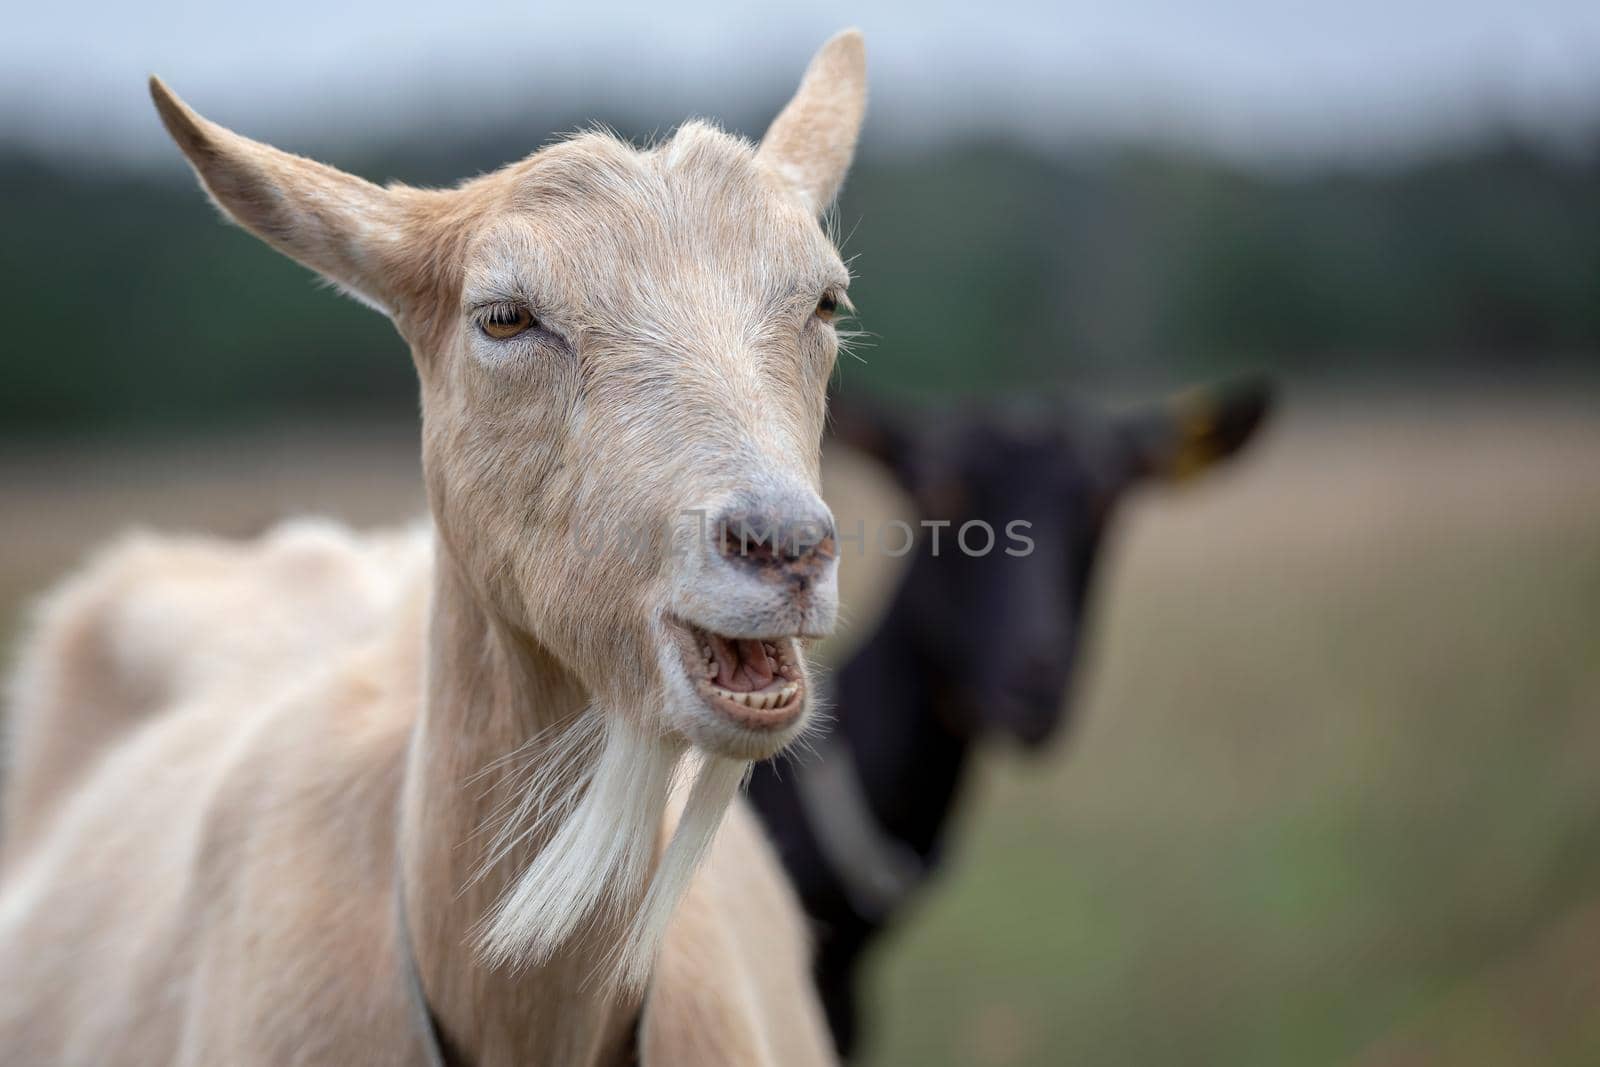 Goat grazing in the meadow shouts loudly and shows his teeth